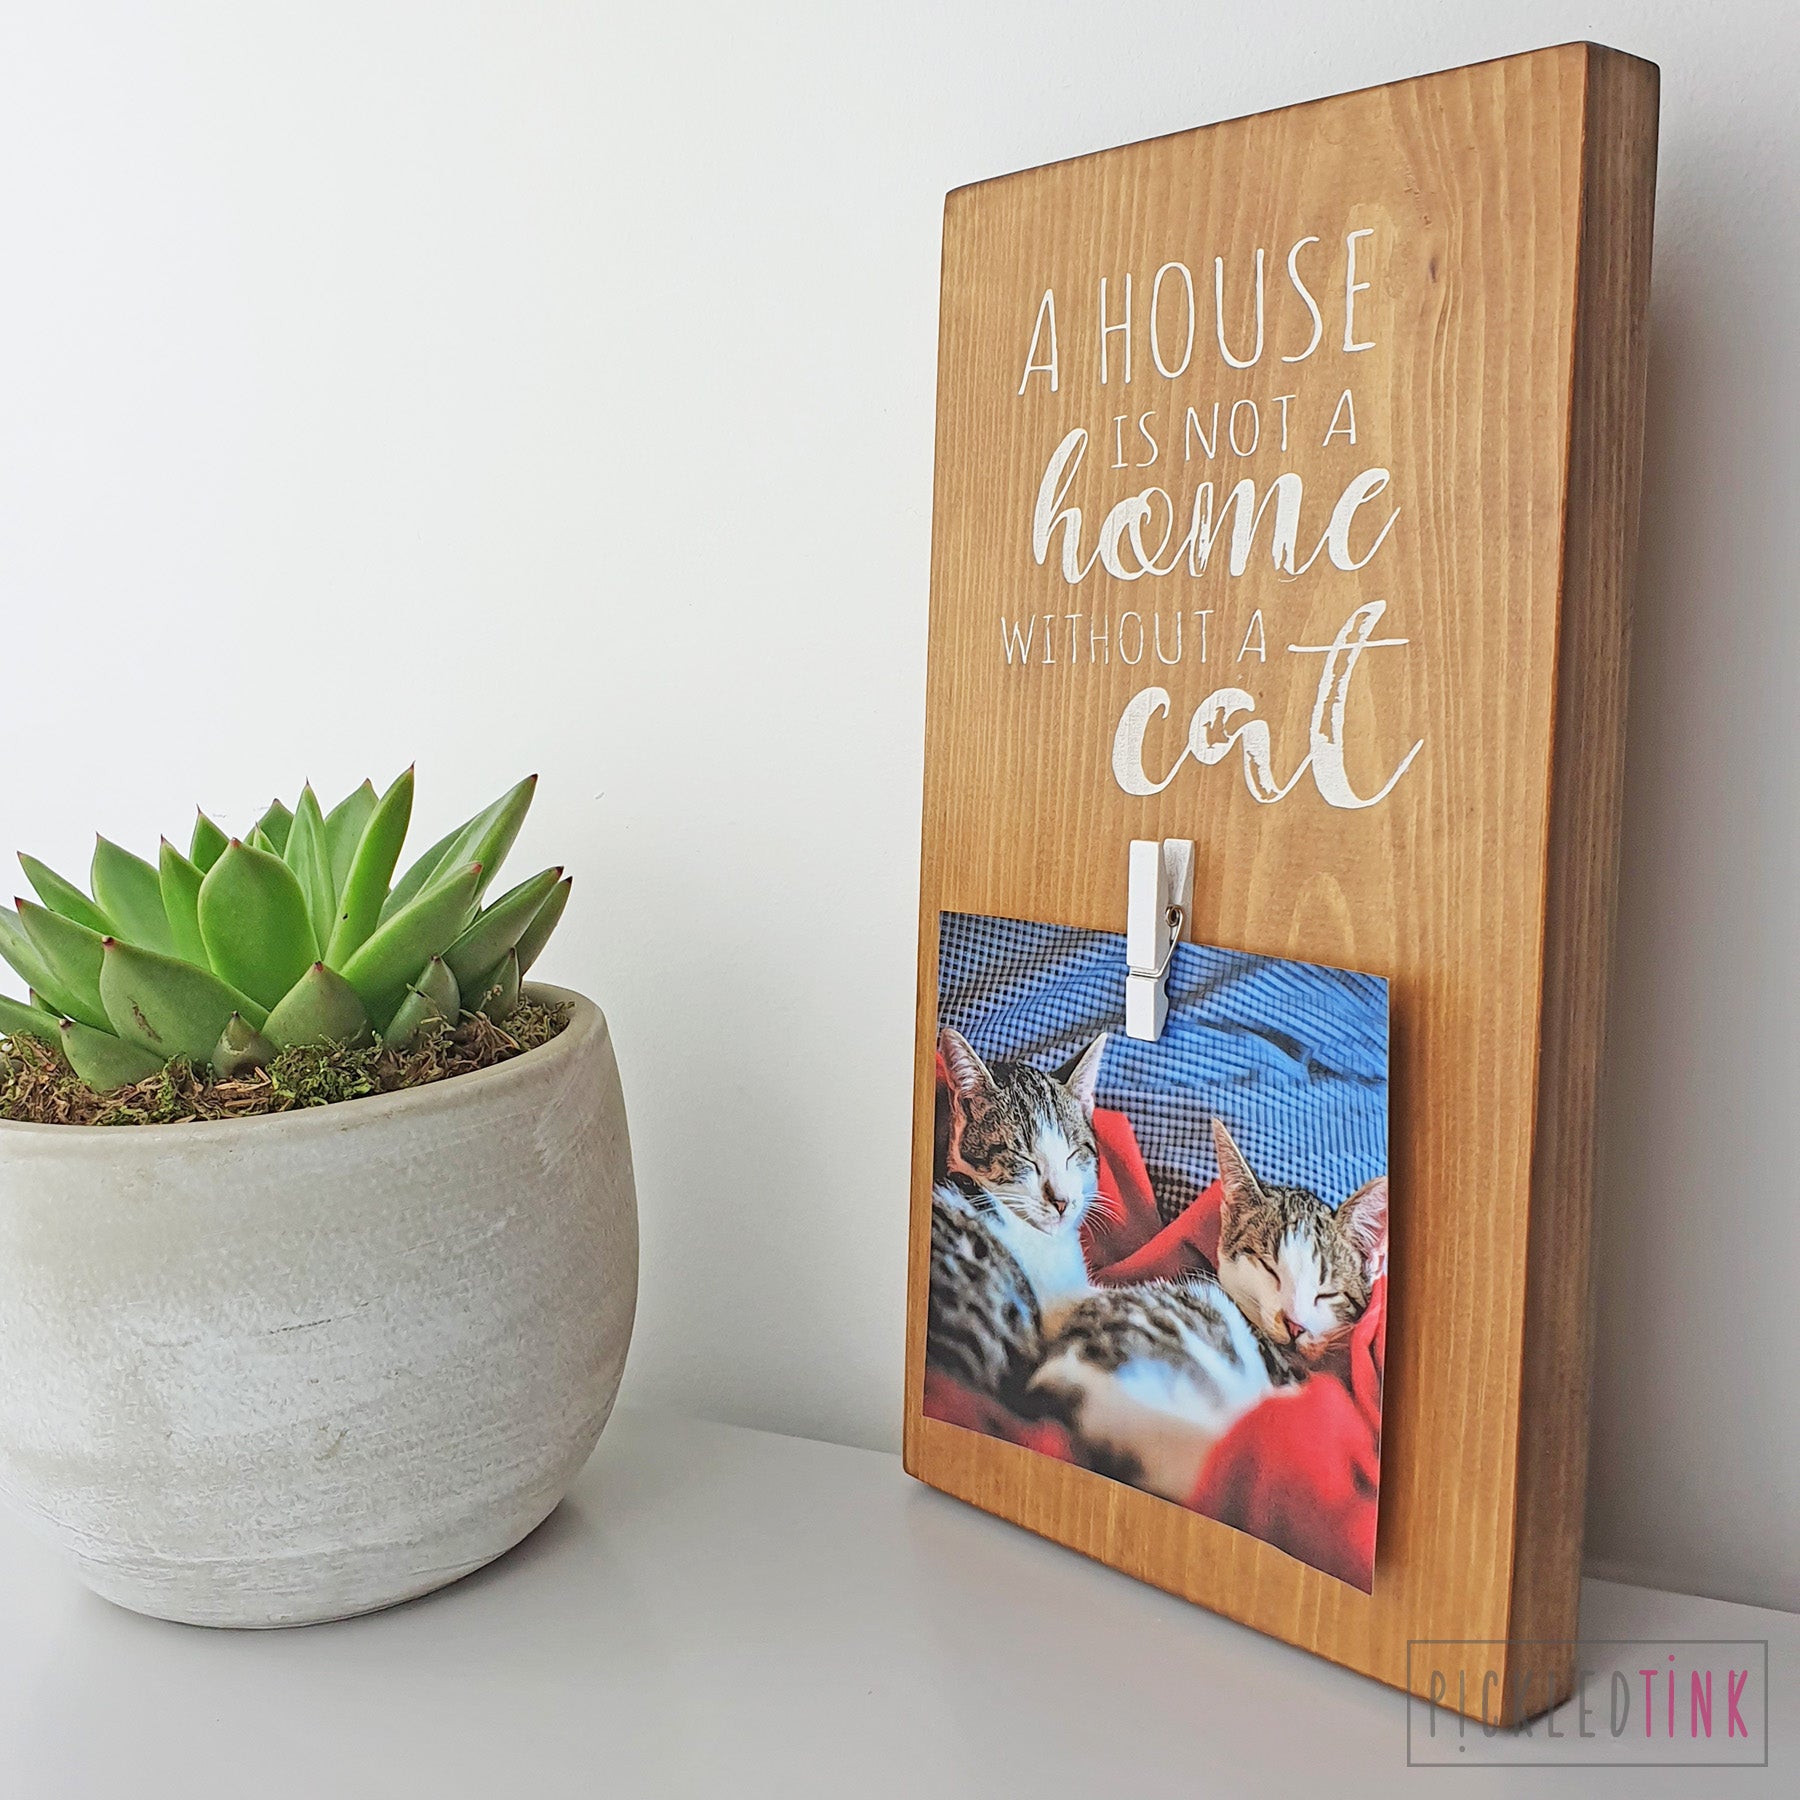 A house is not a home without a cat - Peg Photo Frame